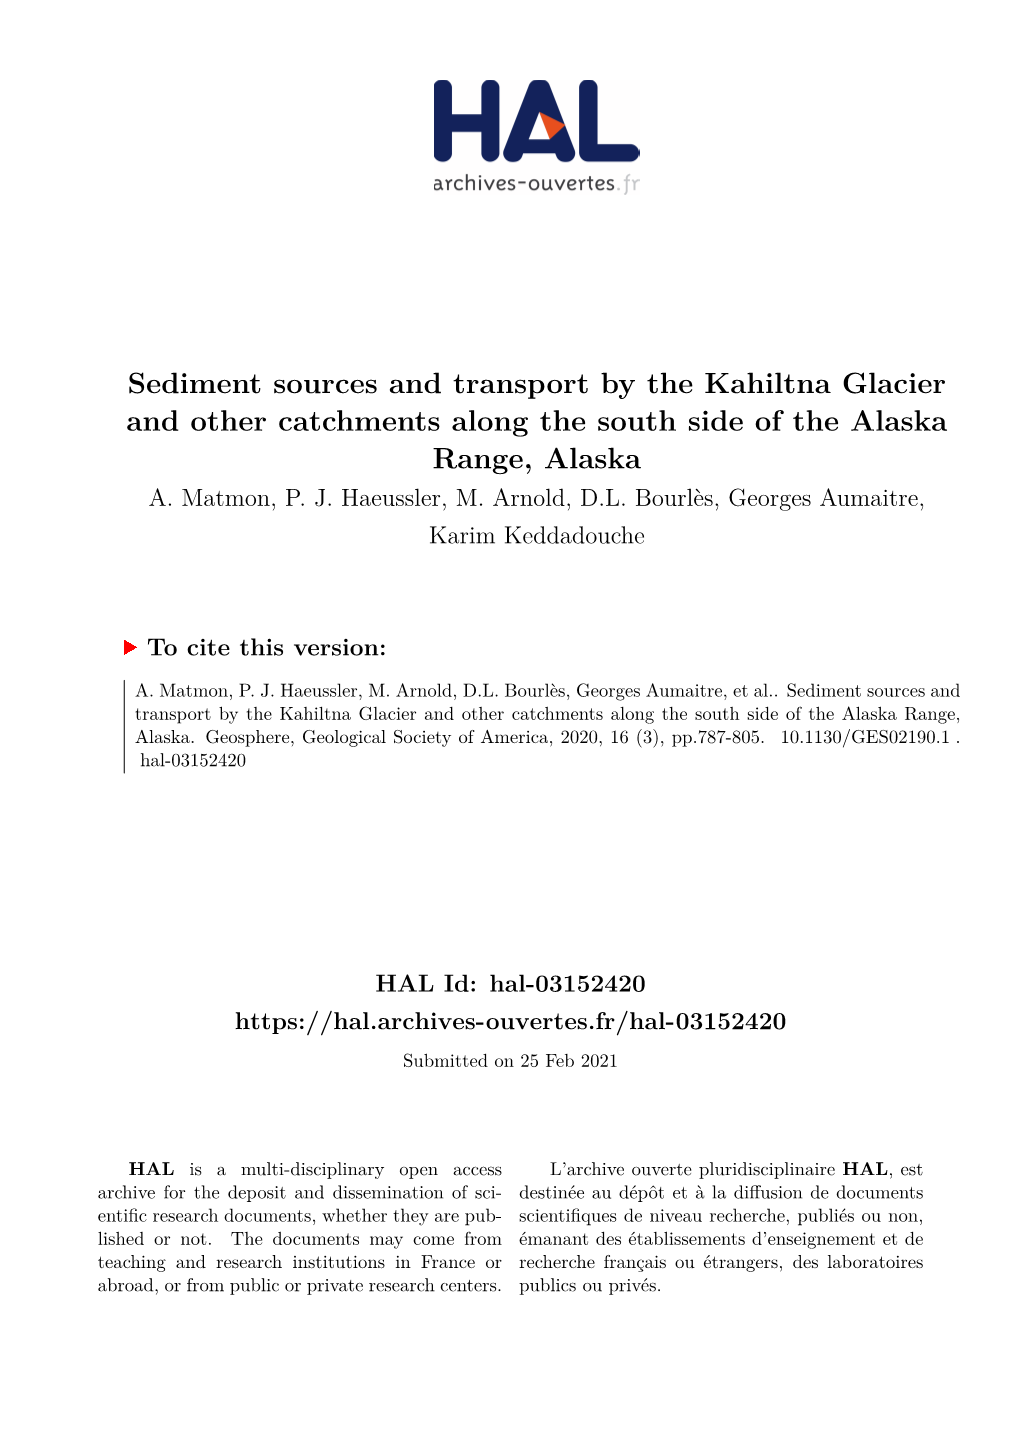 Sediment Sources and Transport by the Kahiltna Glacier and Other Catchments Along the South Side of the Alaska Range, Alaska A